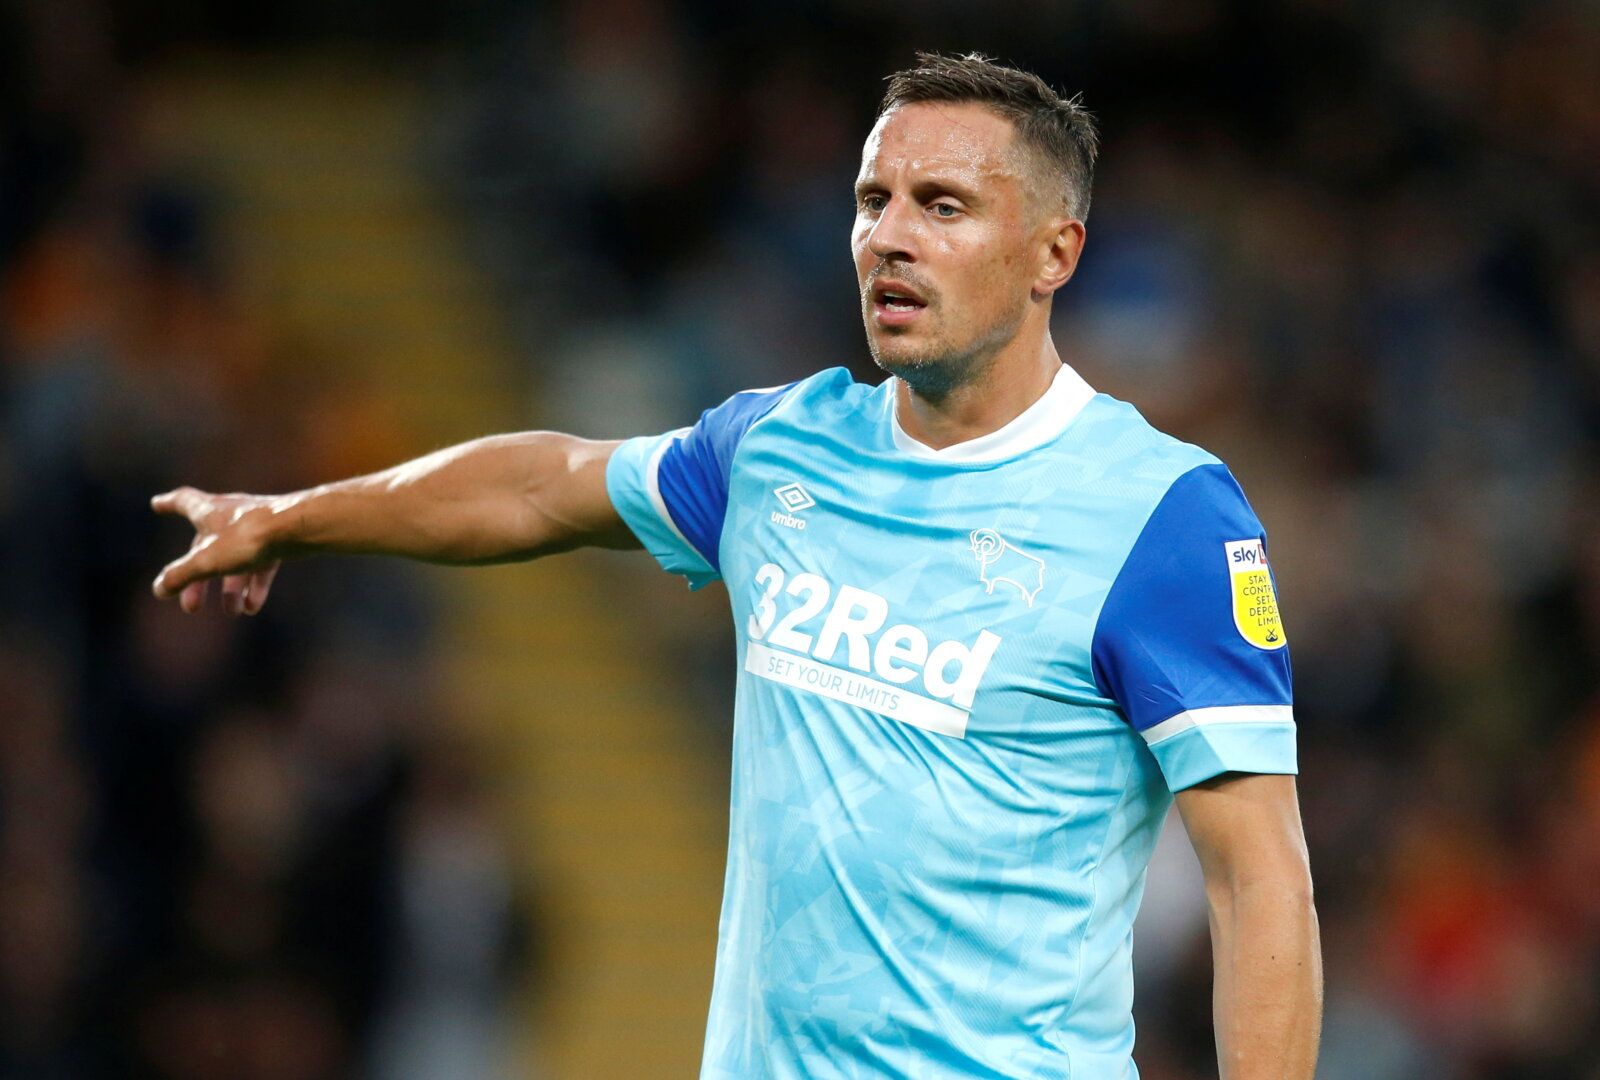 Soccer Football - Championship - Hull City v Derby County - KCOM Stadium, Hull, Britain - August 18, 2021  Derby County's Phil Jagielka  Action Images/Ed Sykes  EDITORIAL USE ONLY. No use with unauthorized audio, video, data, fixture lists, club/league logos or 